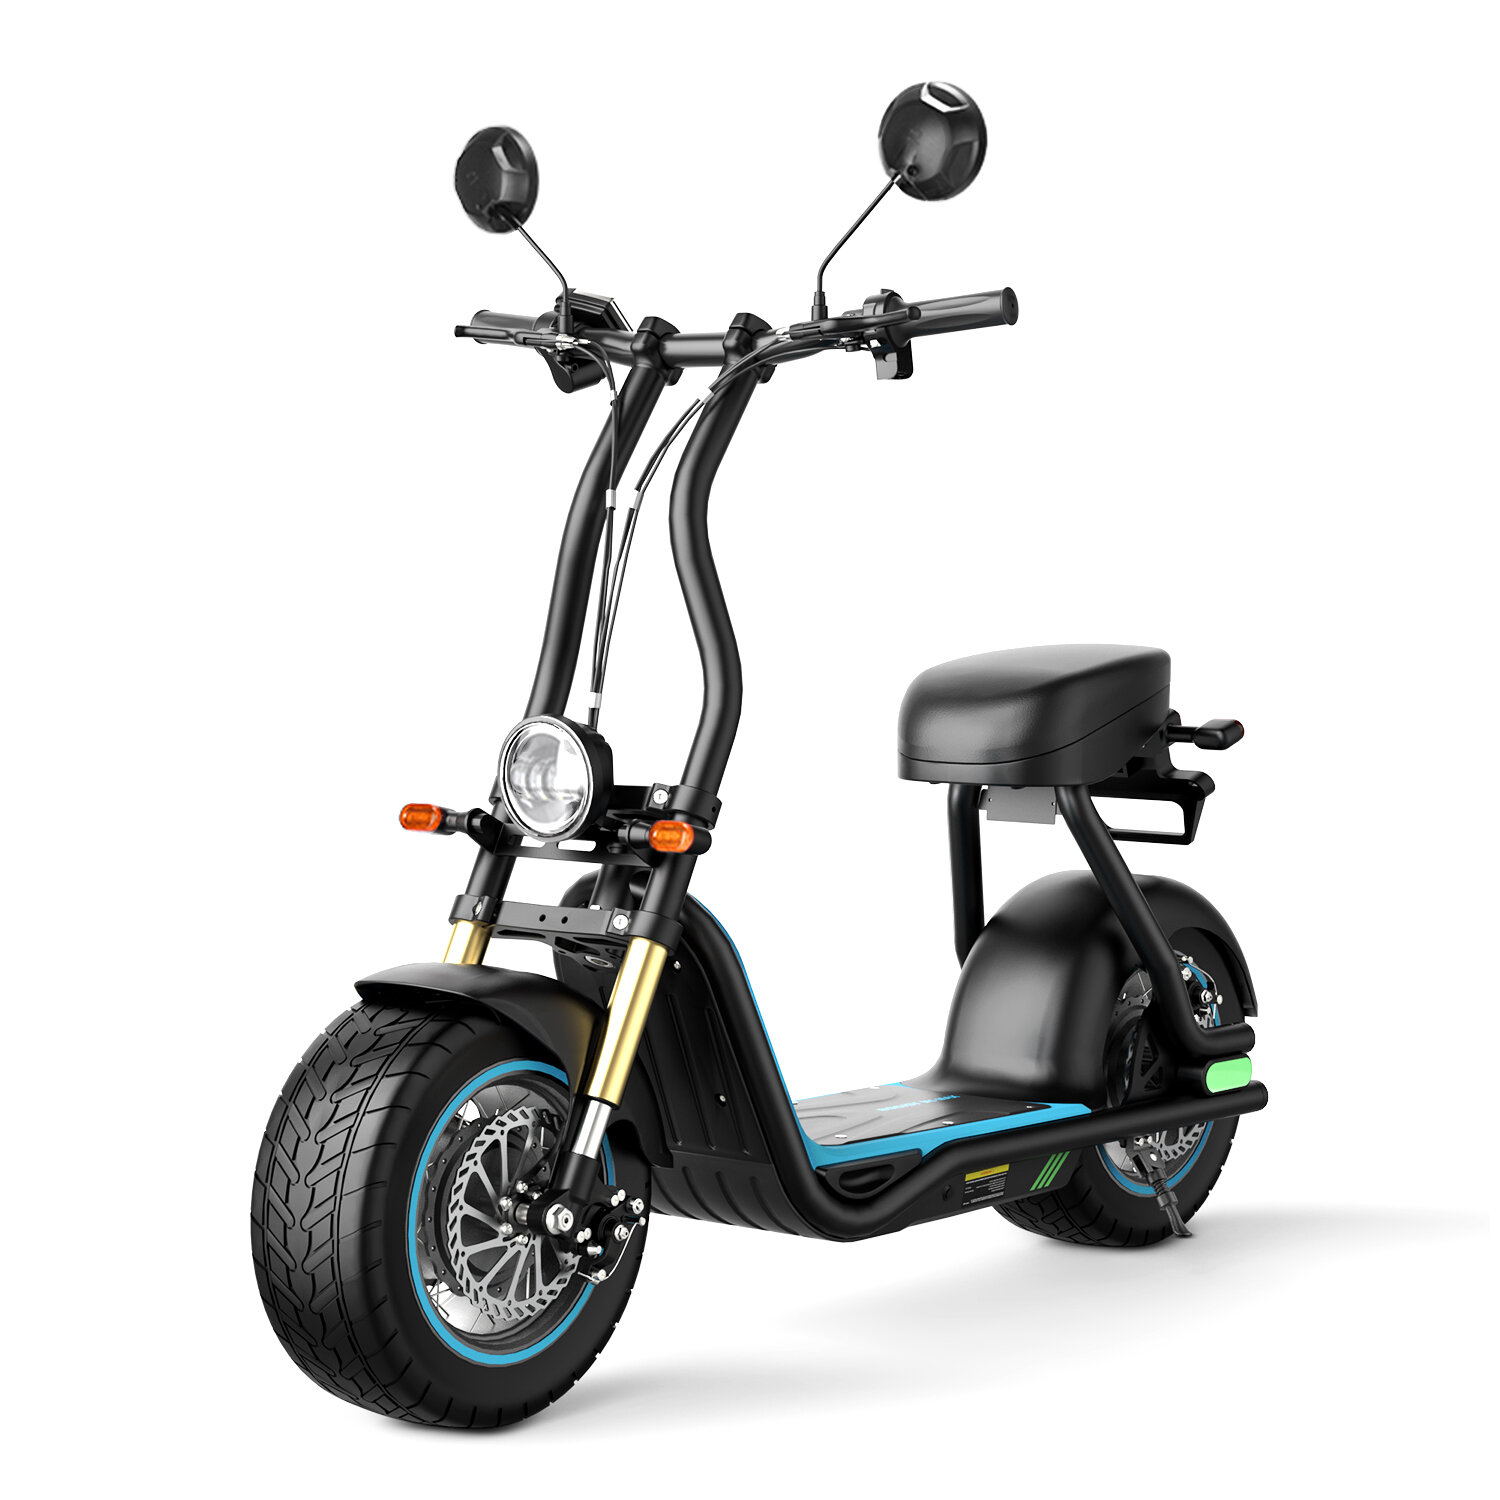 best price,bogist,m5,max,electric,scooter,seat,54.6v,13ah,1000w,14inch,discount